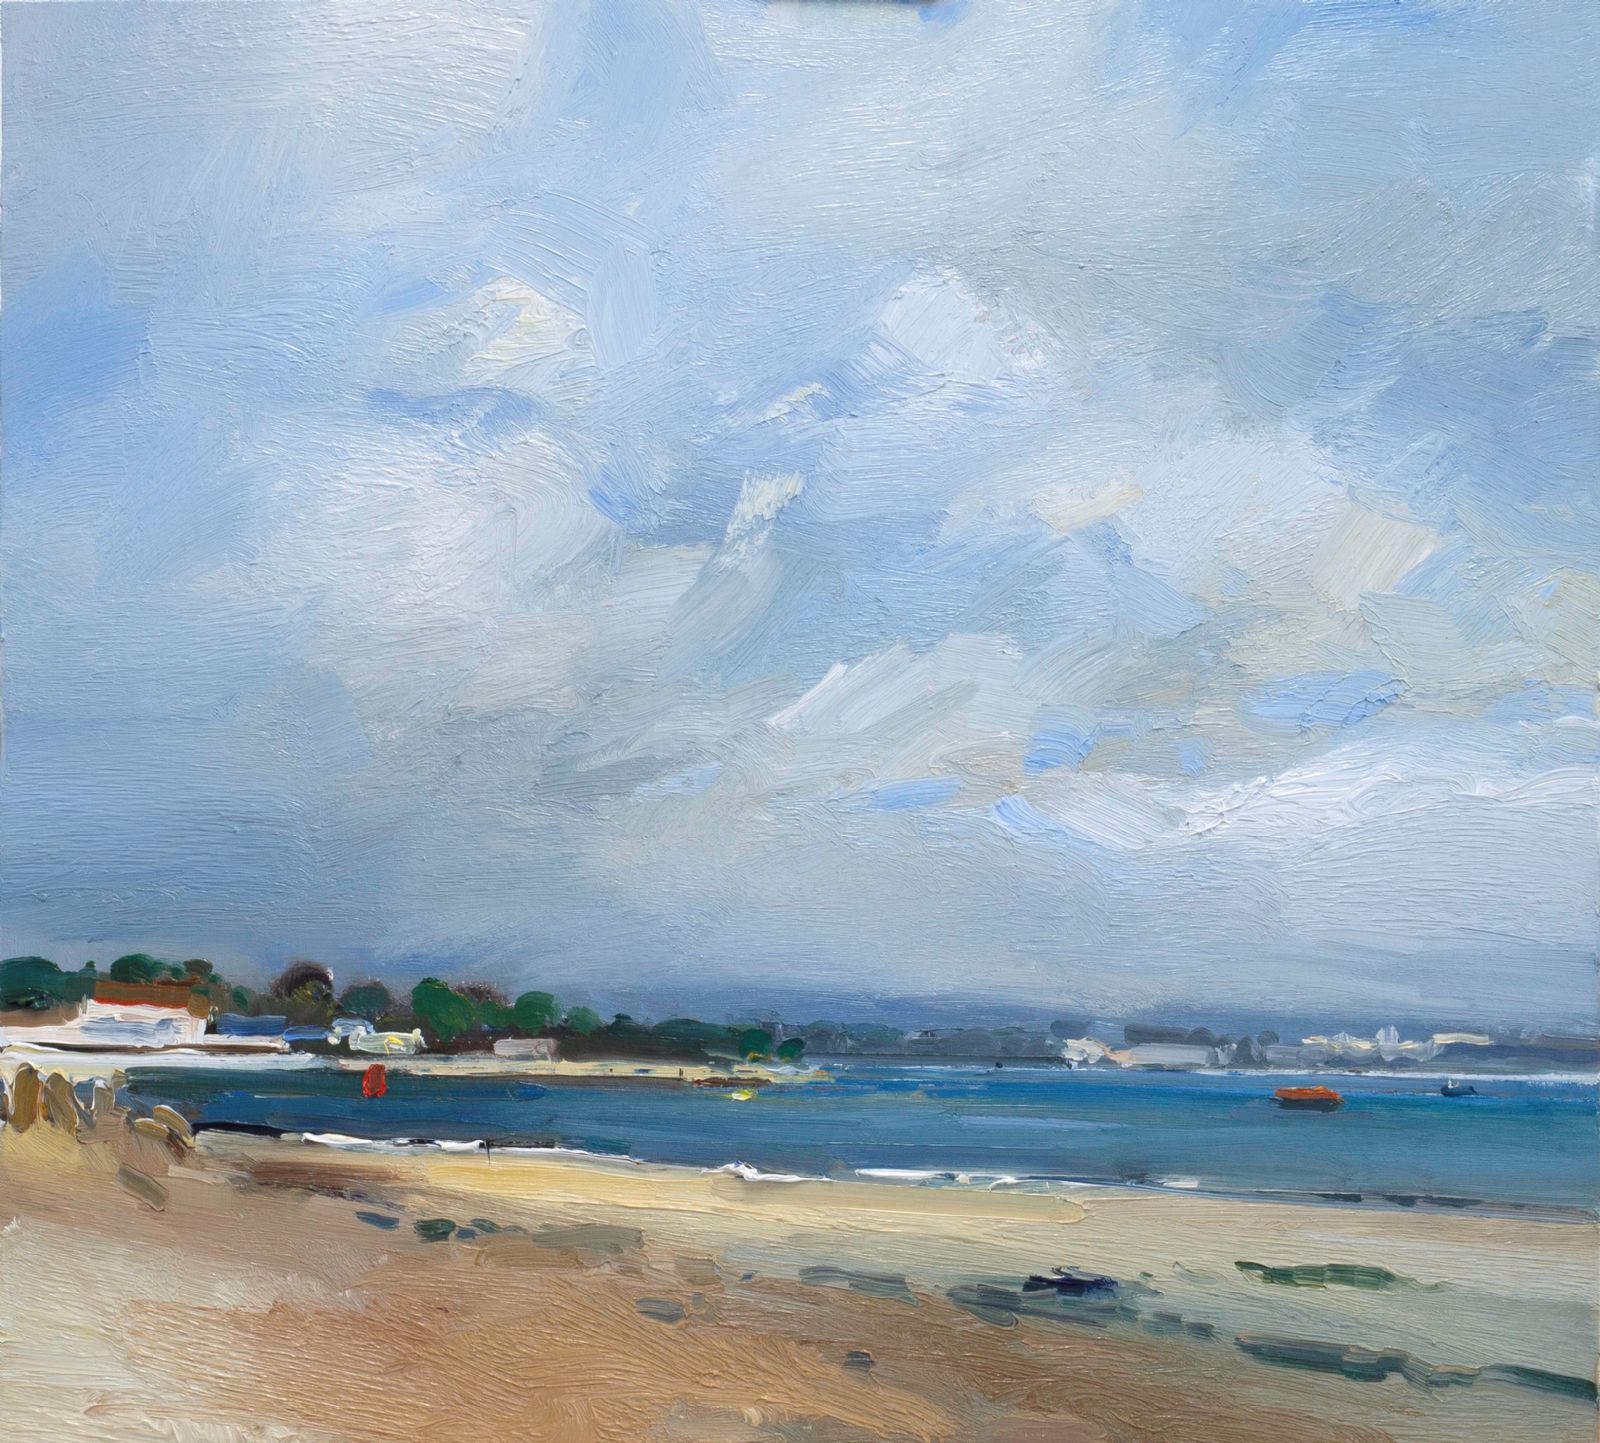 A Sunny Day at Poole Harbour, Dorset by David Atkins